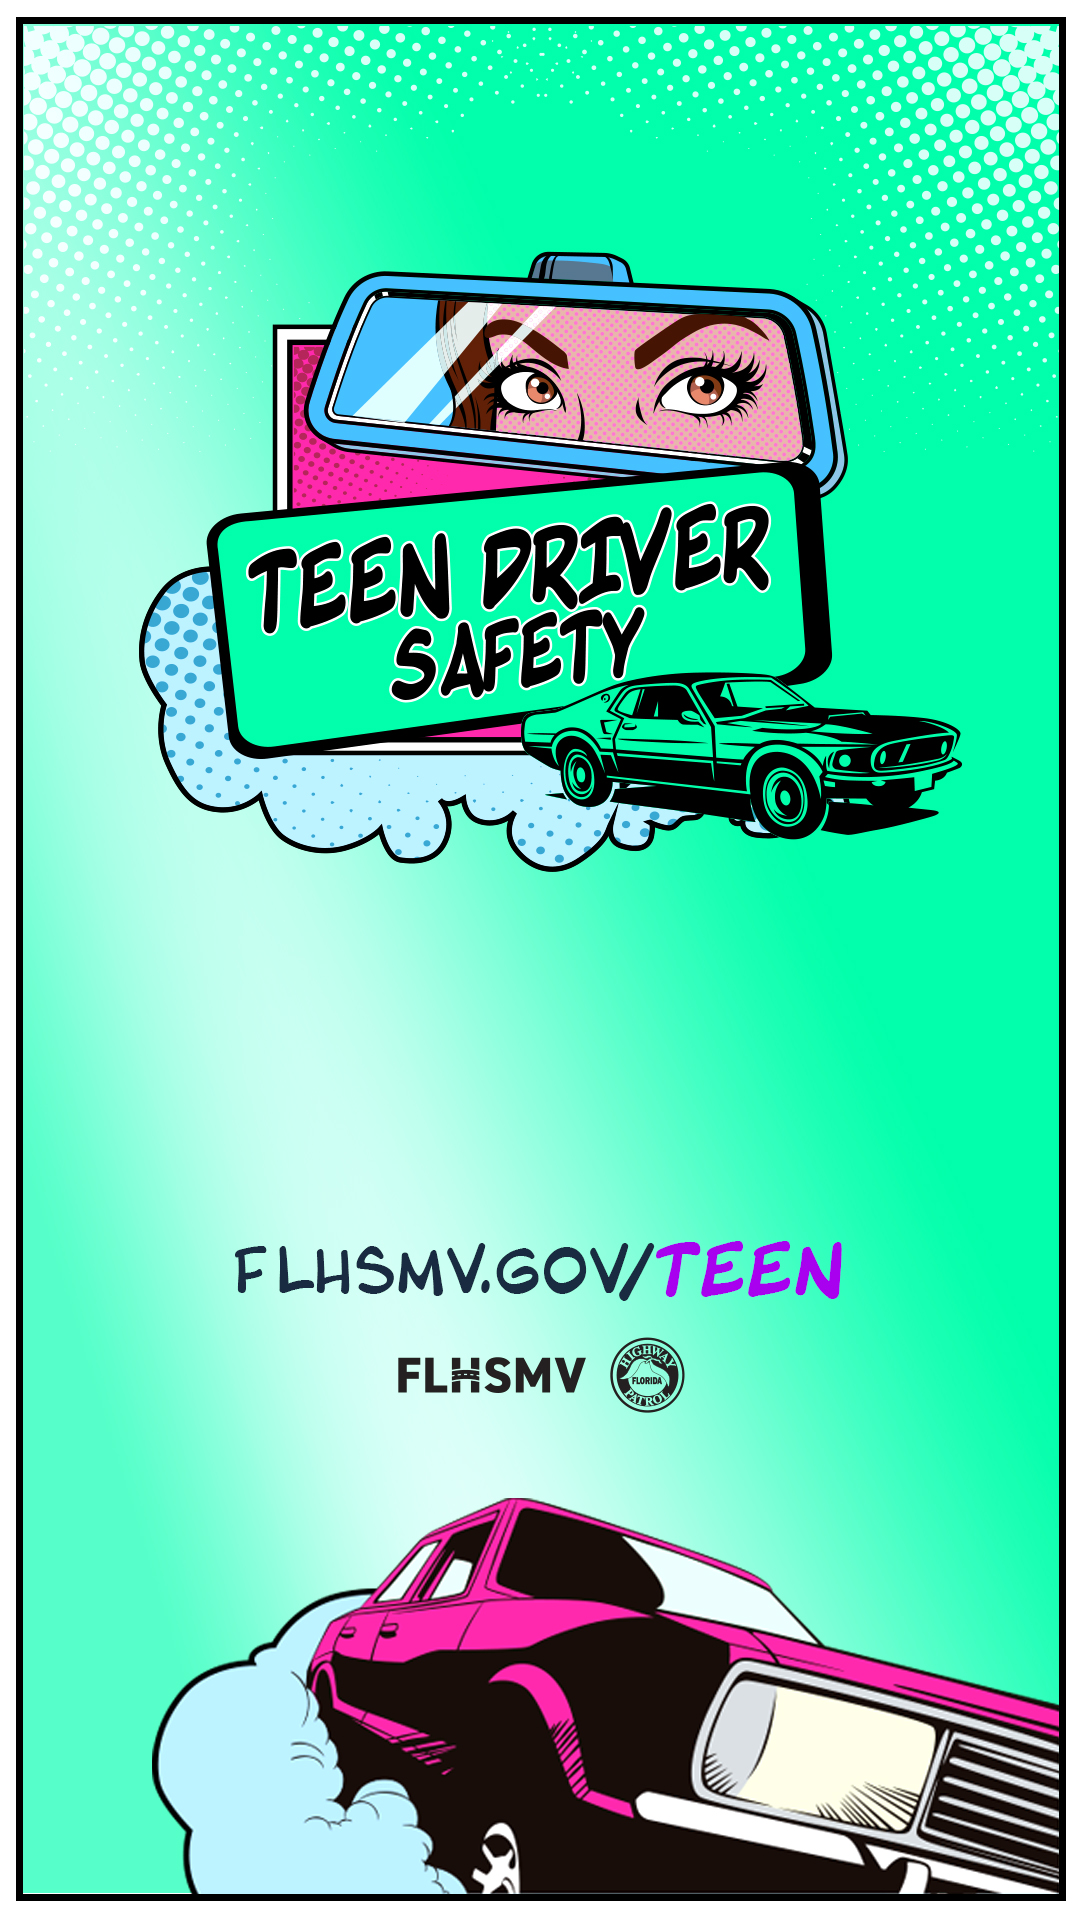 Teen Driver Safety 1080 by 1920 image